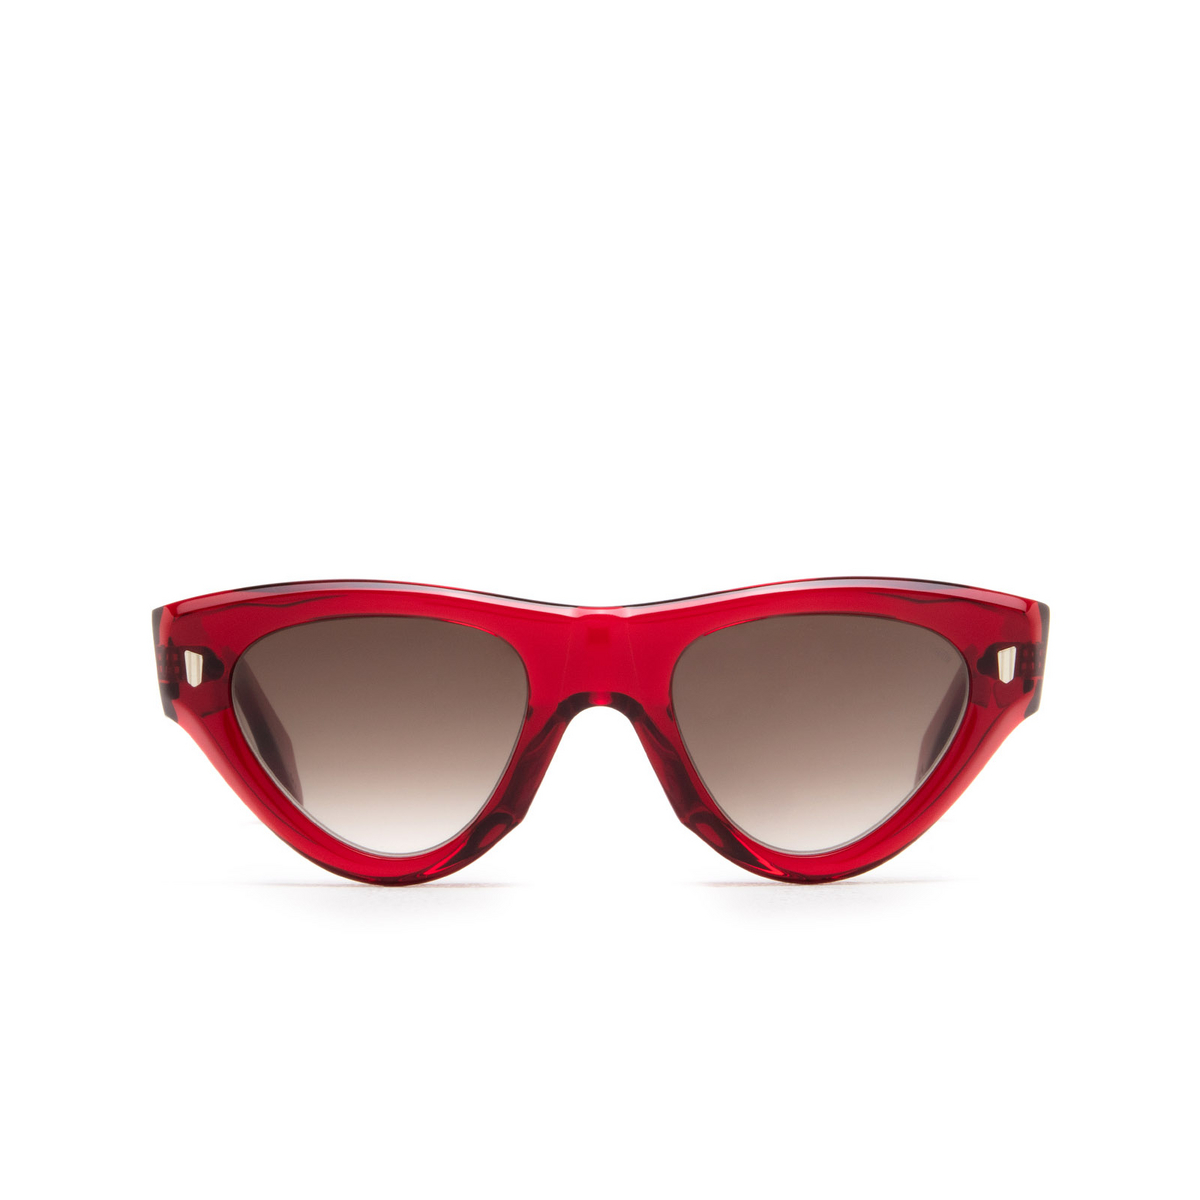 Occhiali da sole Cutler and Gross 9926 04 Crystal Red - frontale